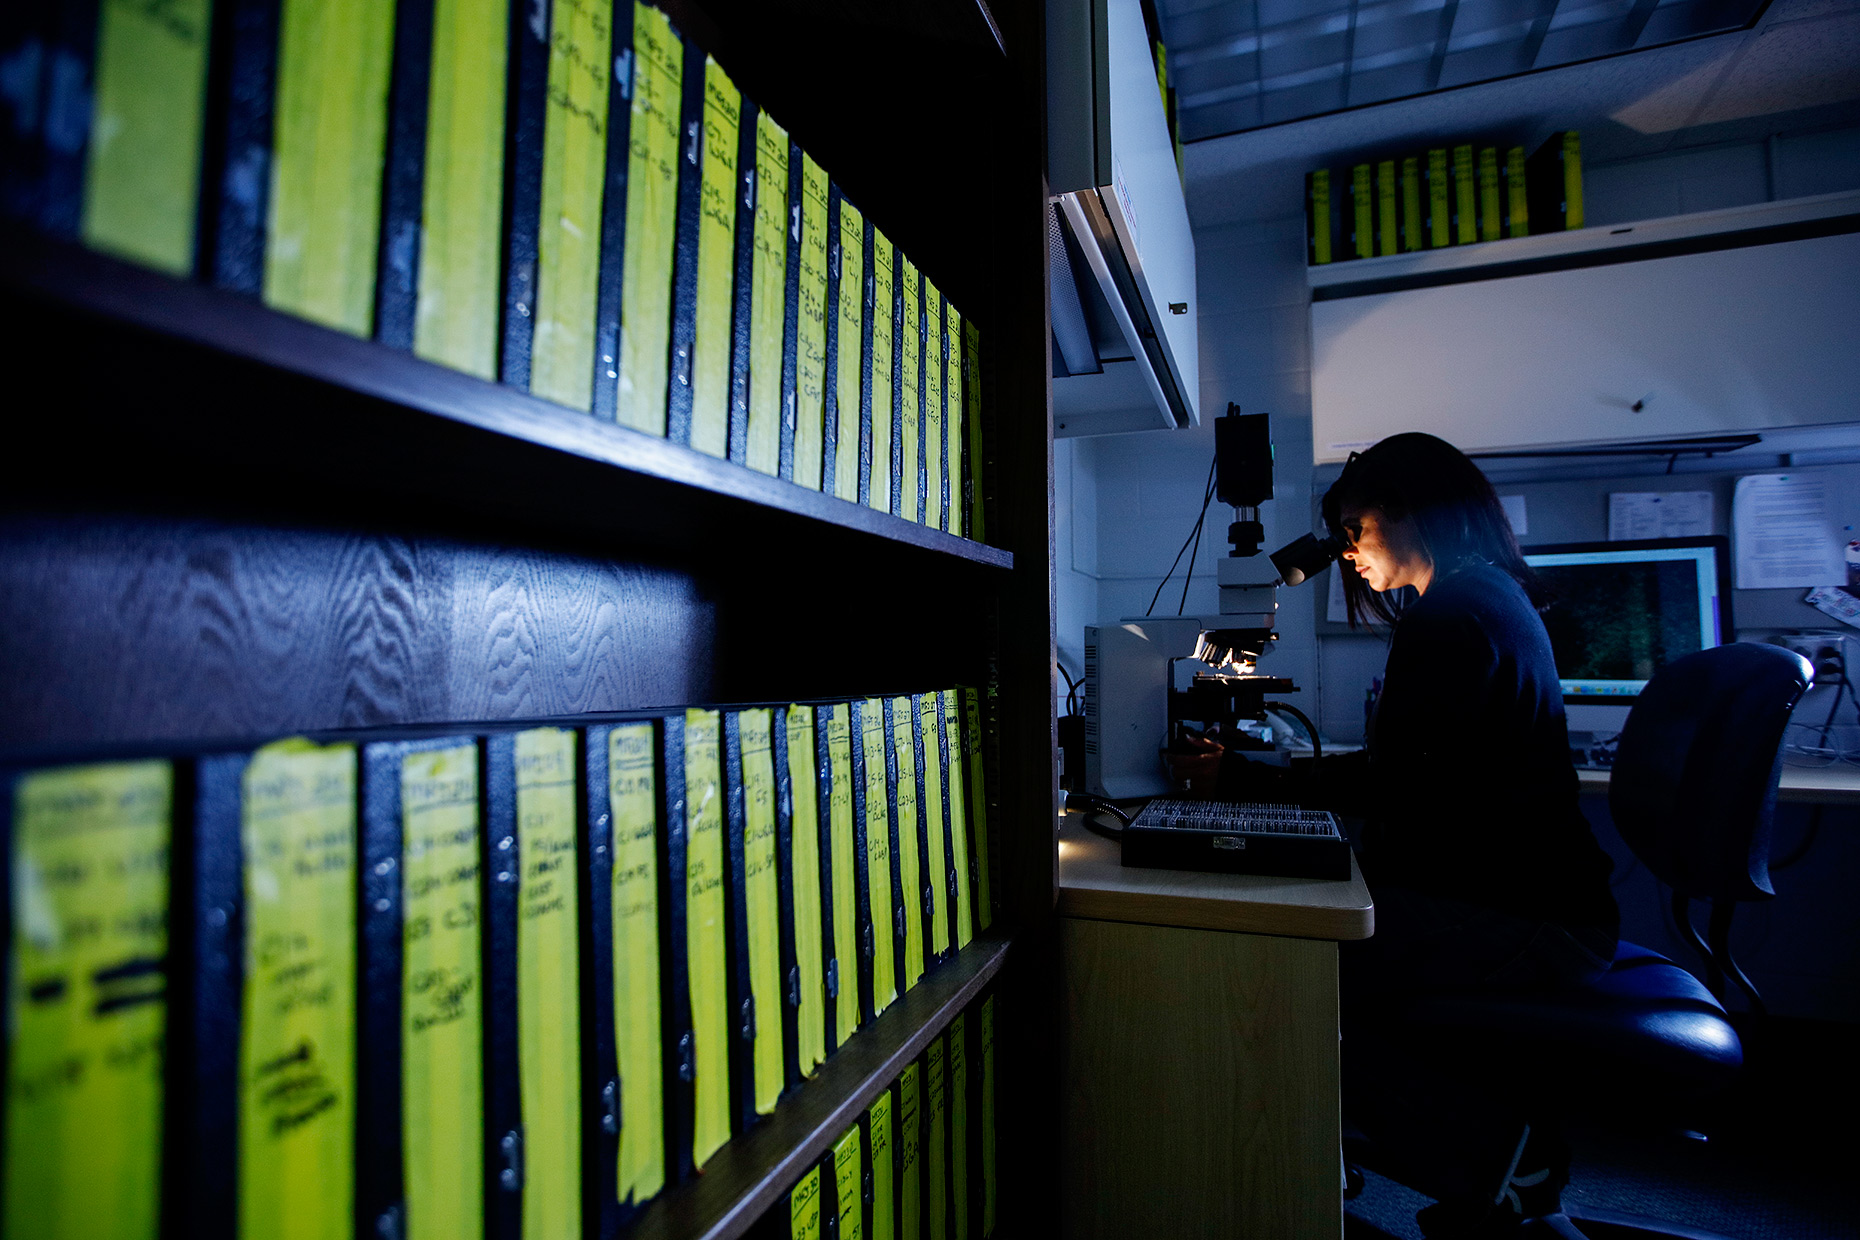 University of Rochester Medical Center Researcher using a microscope in a lab